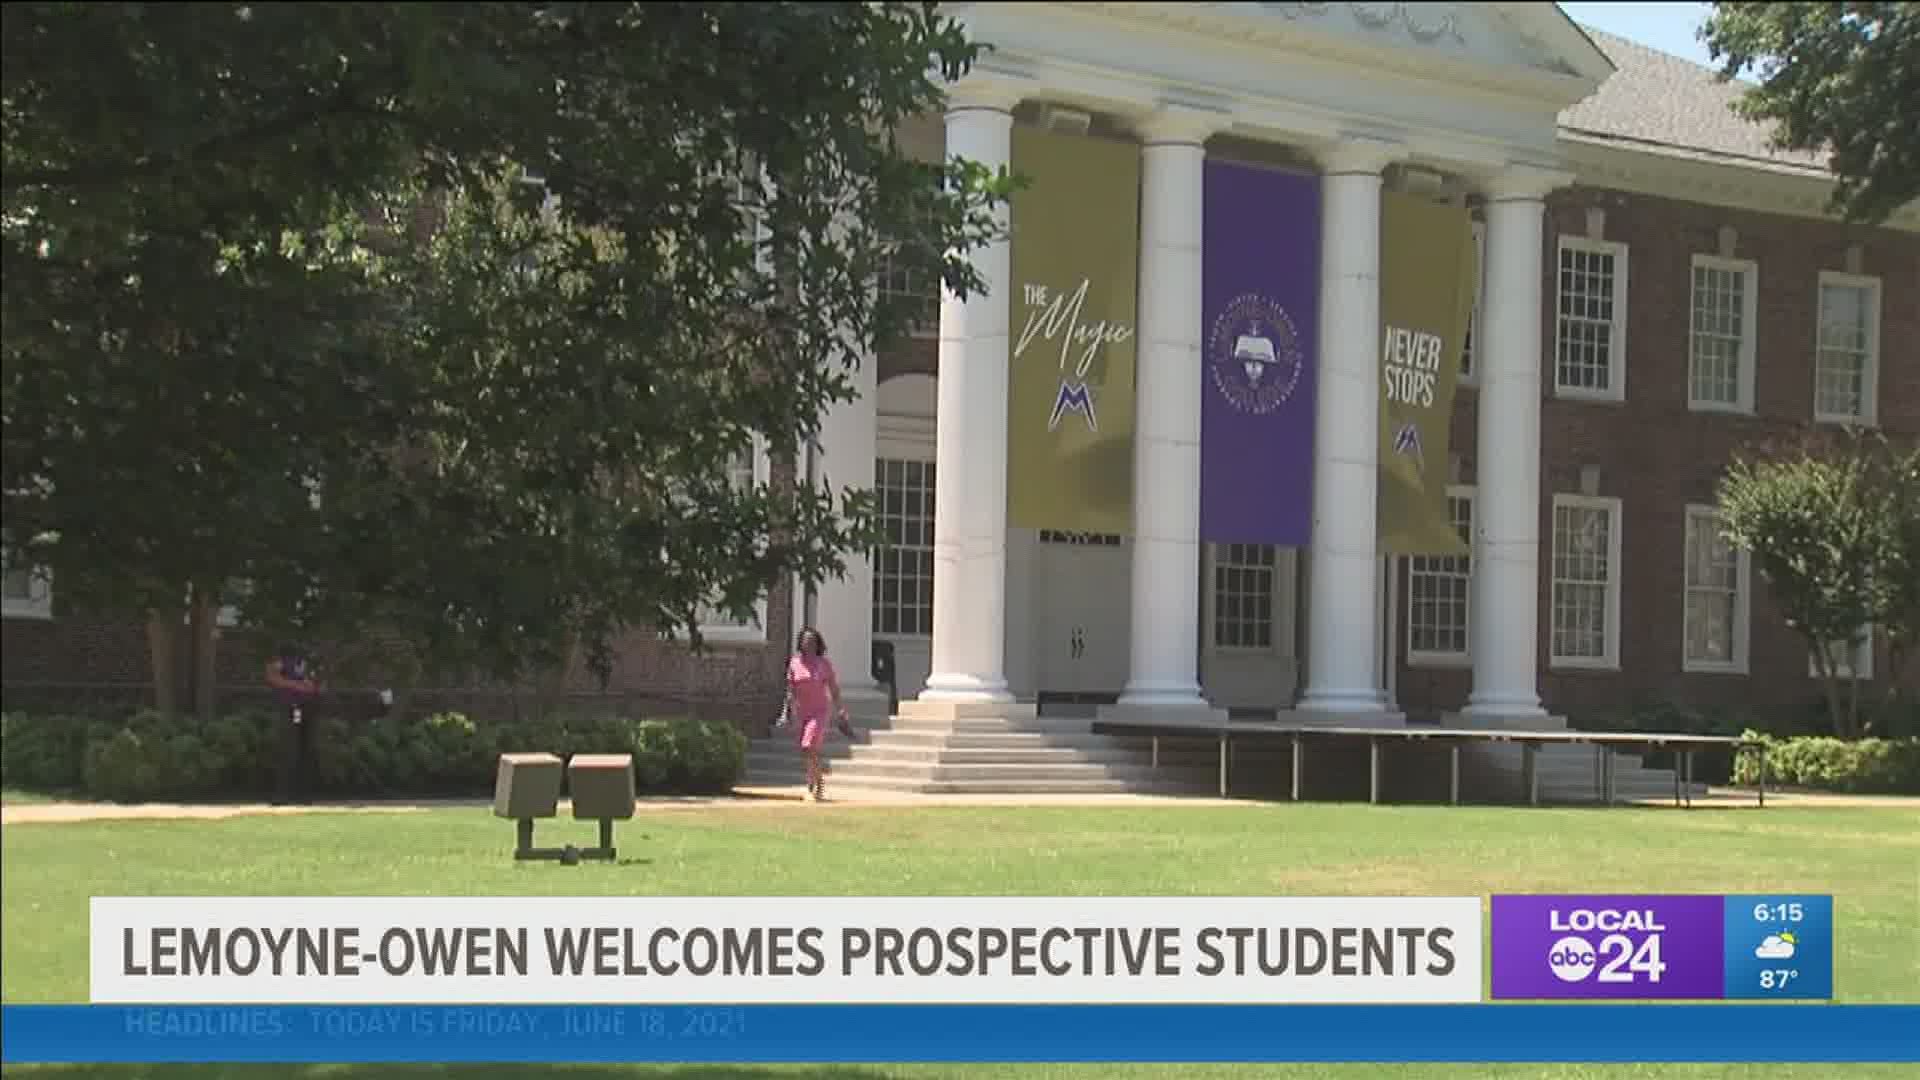 High school students get a preview of the historic HBCU after yearlong campus closing to public due to COVID-19.